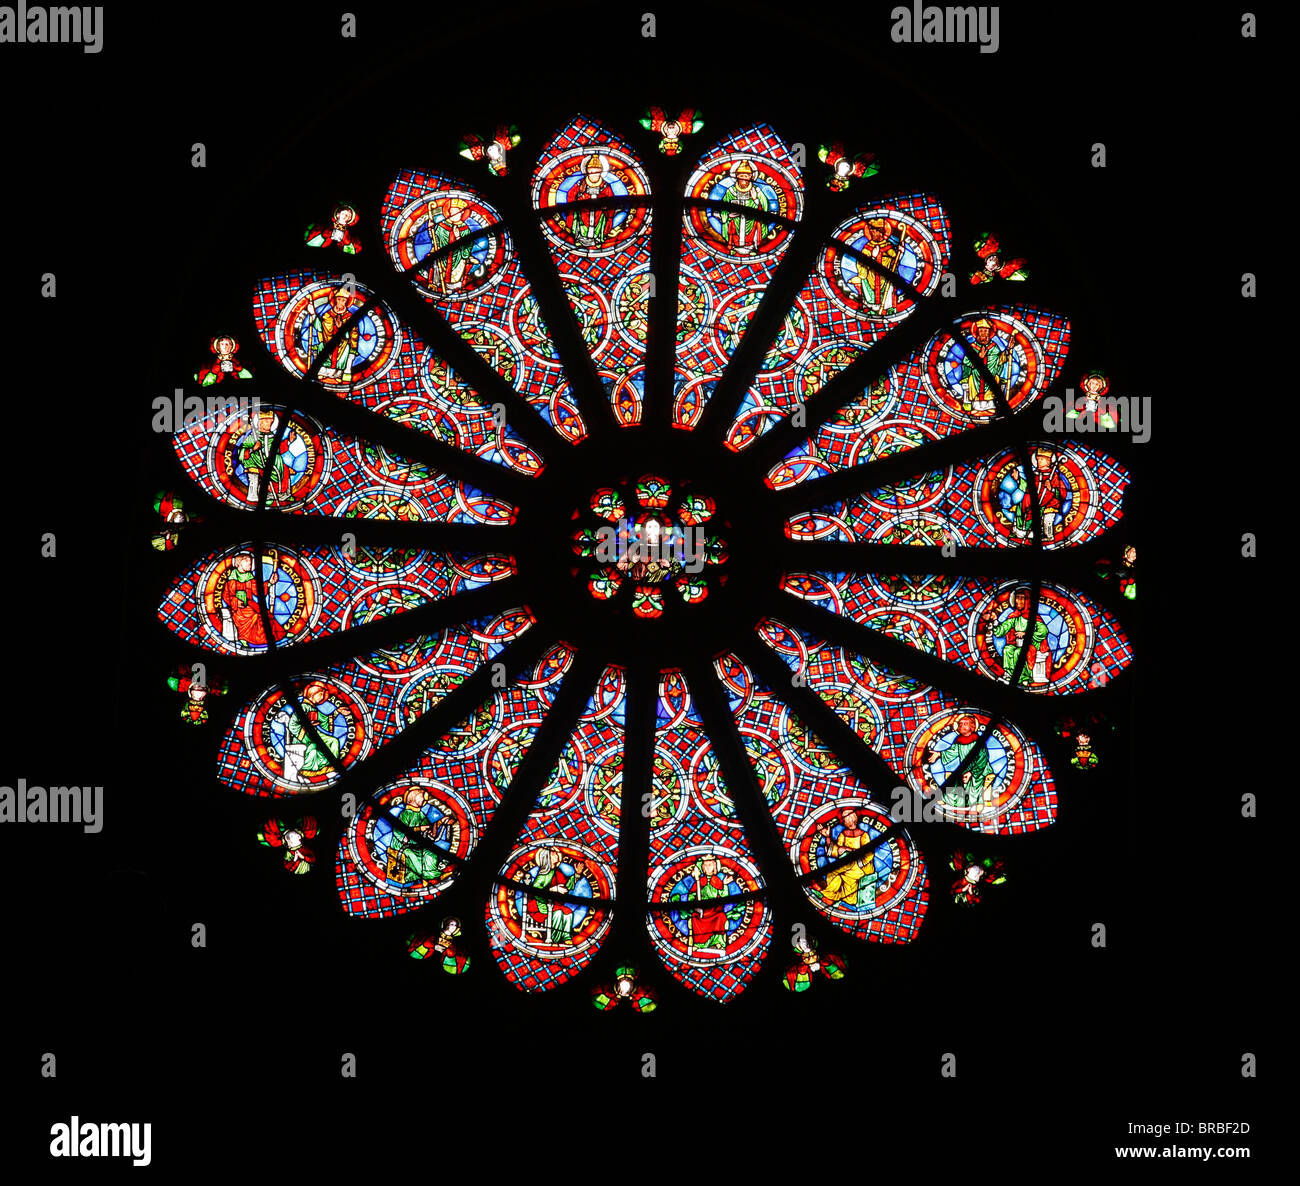 Rose window, St. Remy basilica, UNESCO World Heritage Site, Reims, Marne, France Stock Photo